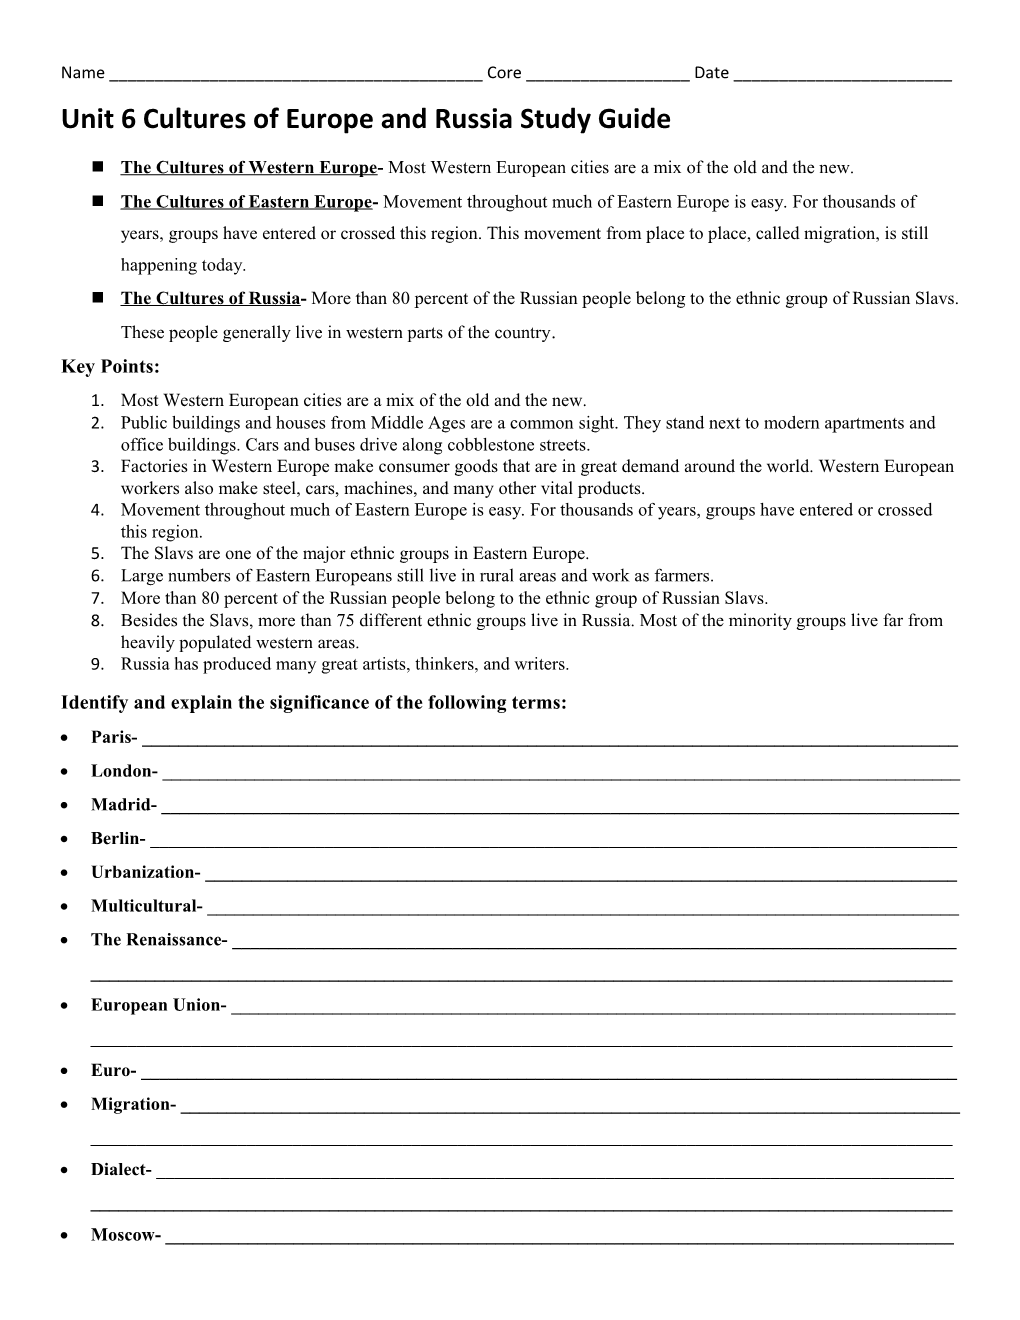 Unit 6 Cultures of Europe and Russia Study Guide